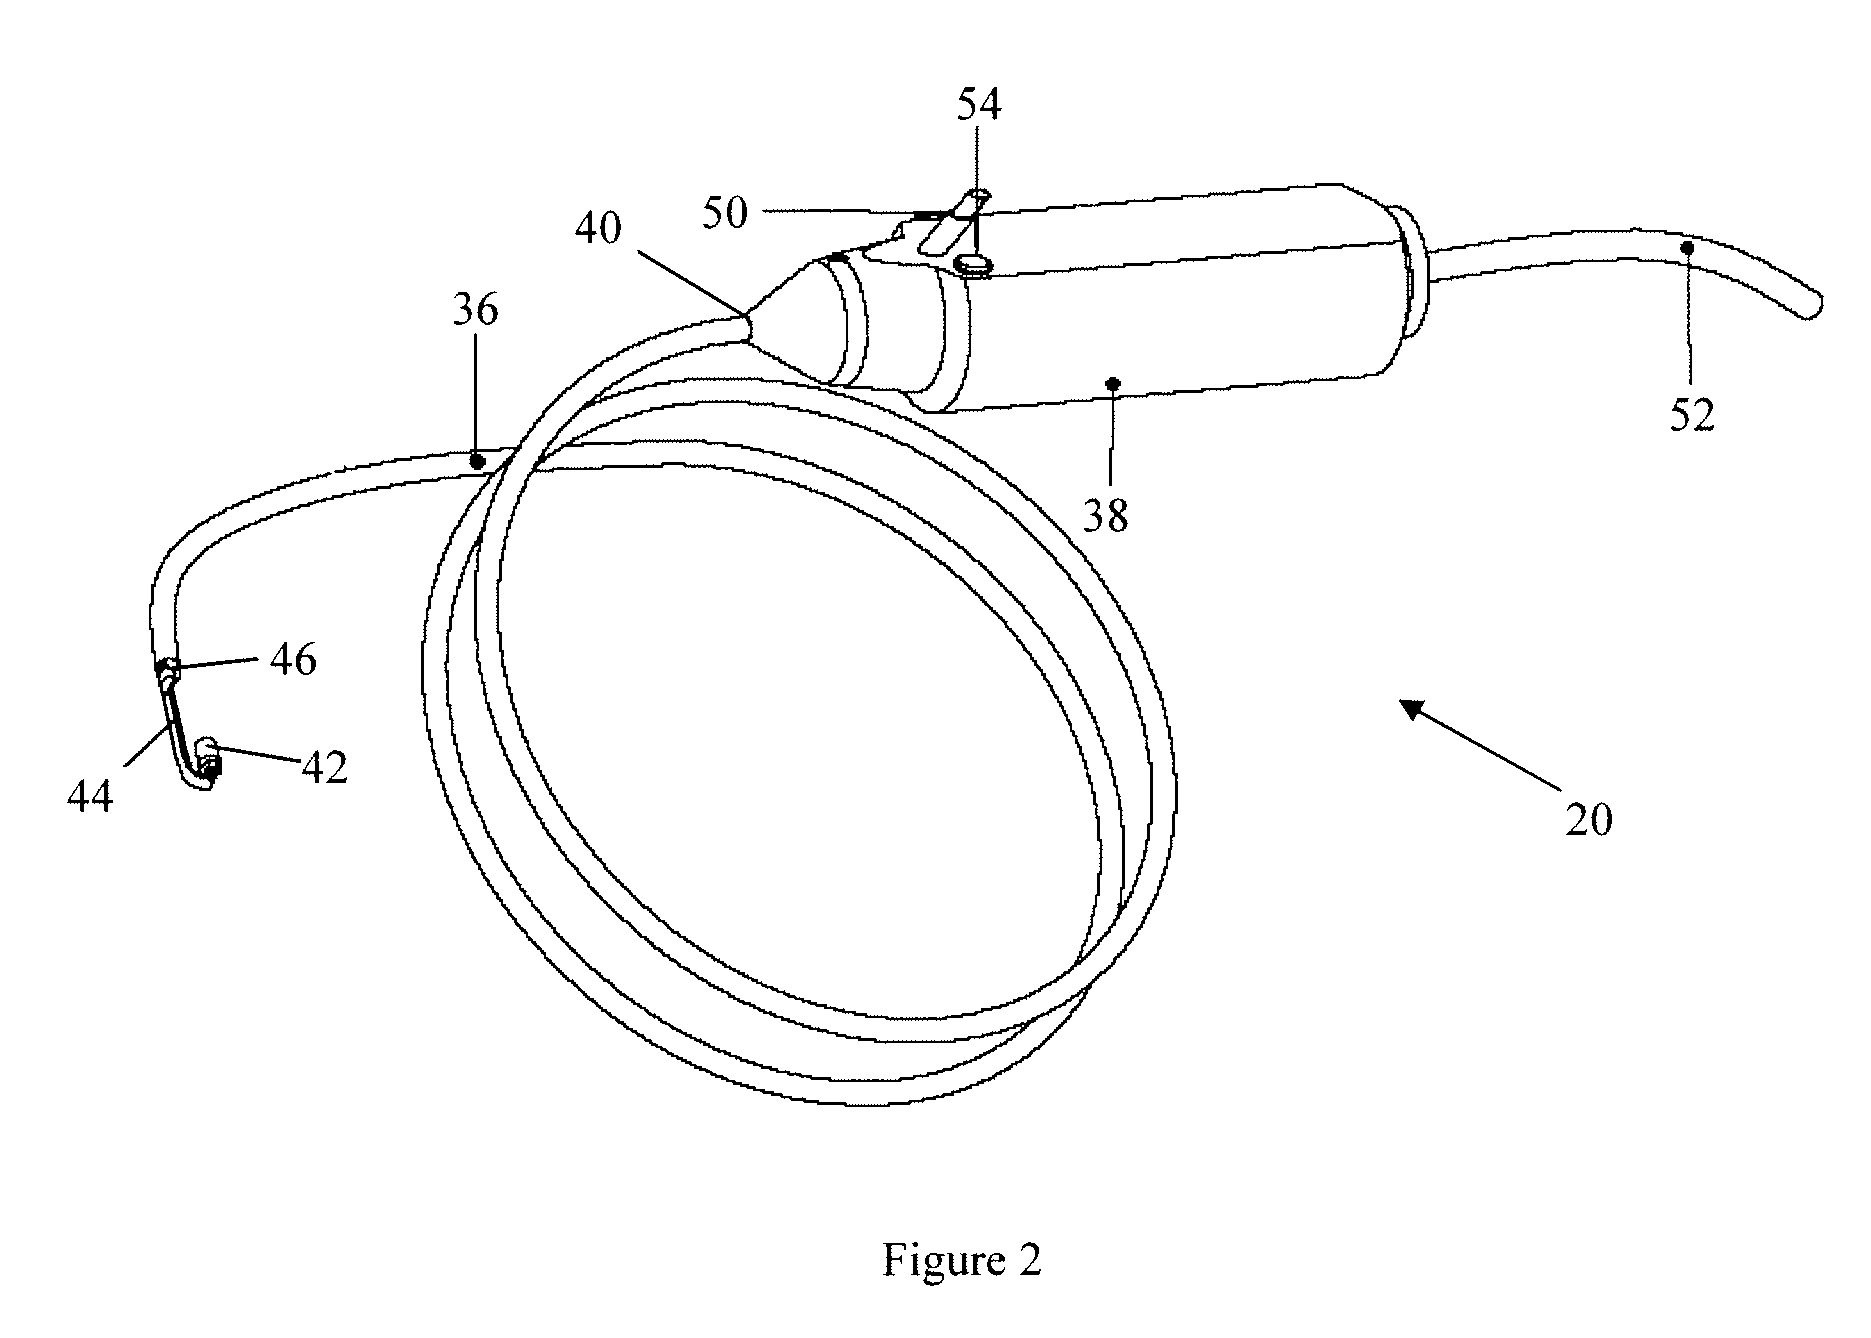 Endoscope assembly and method of viewing an area inside a cavity